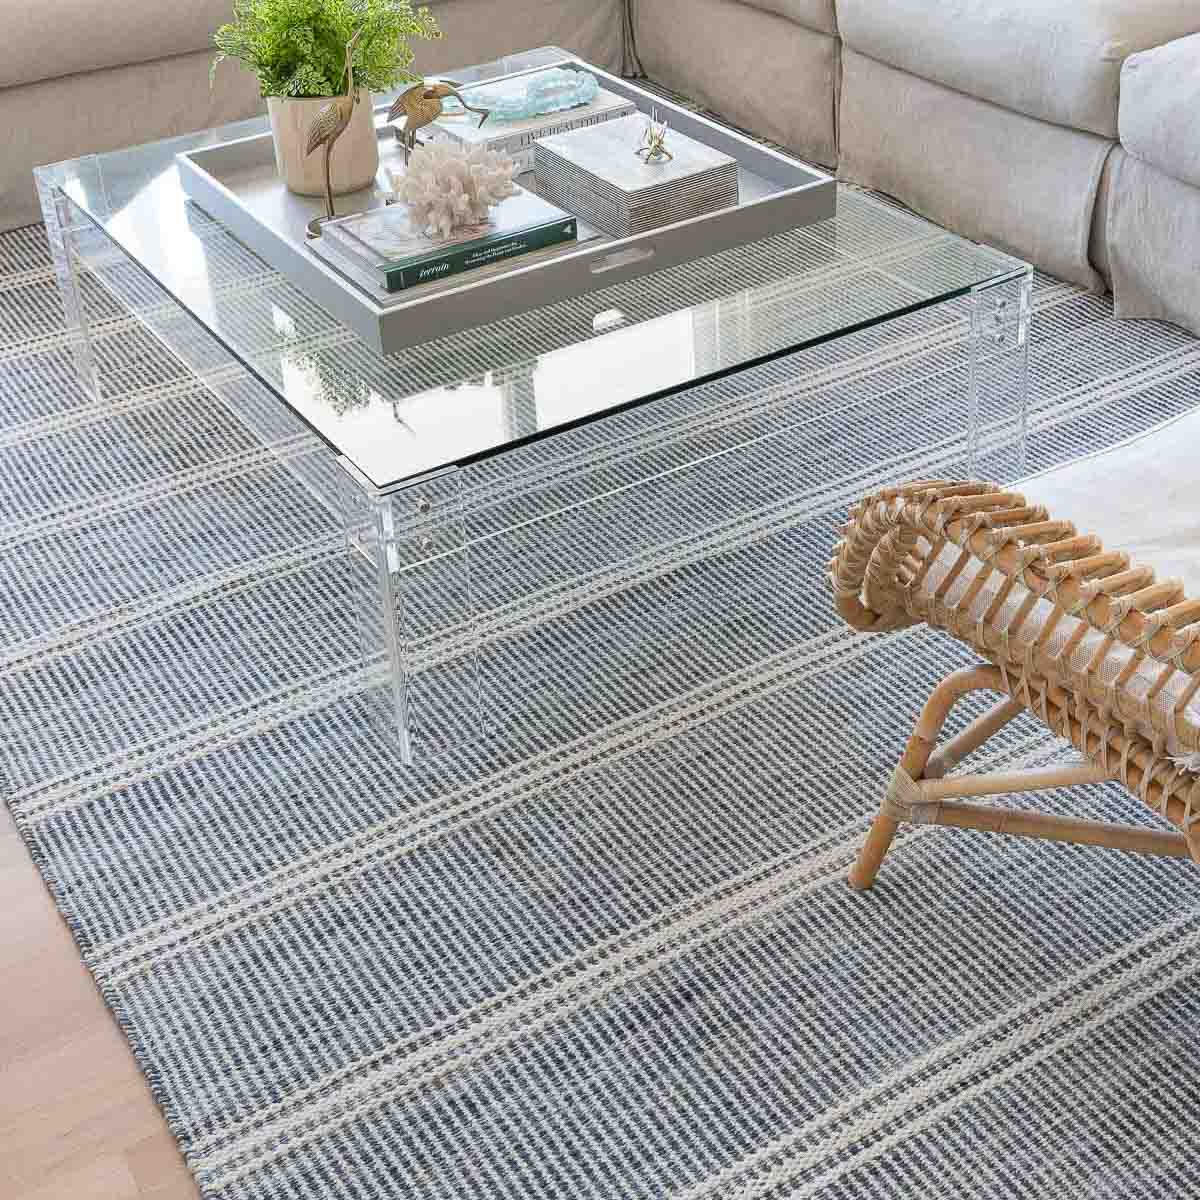 Wayfair Days of Deals is here, and these discounts are epic